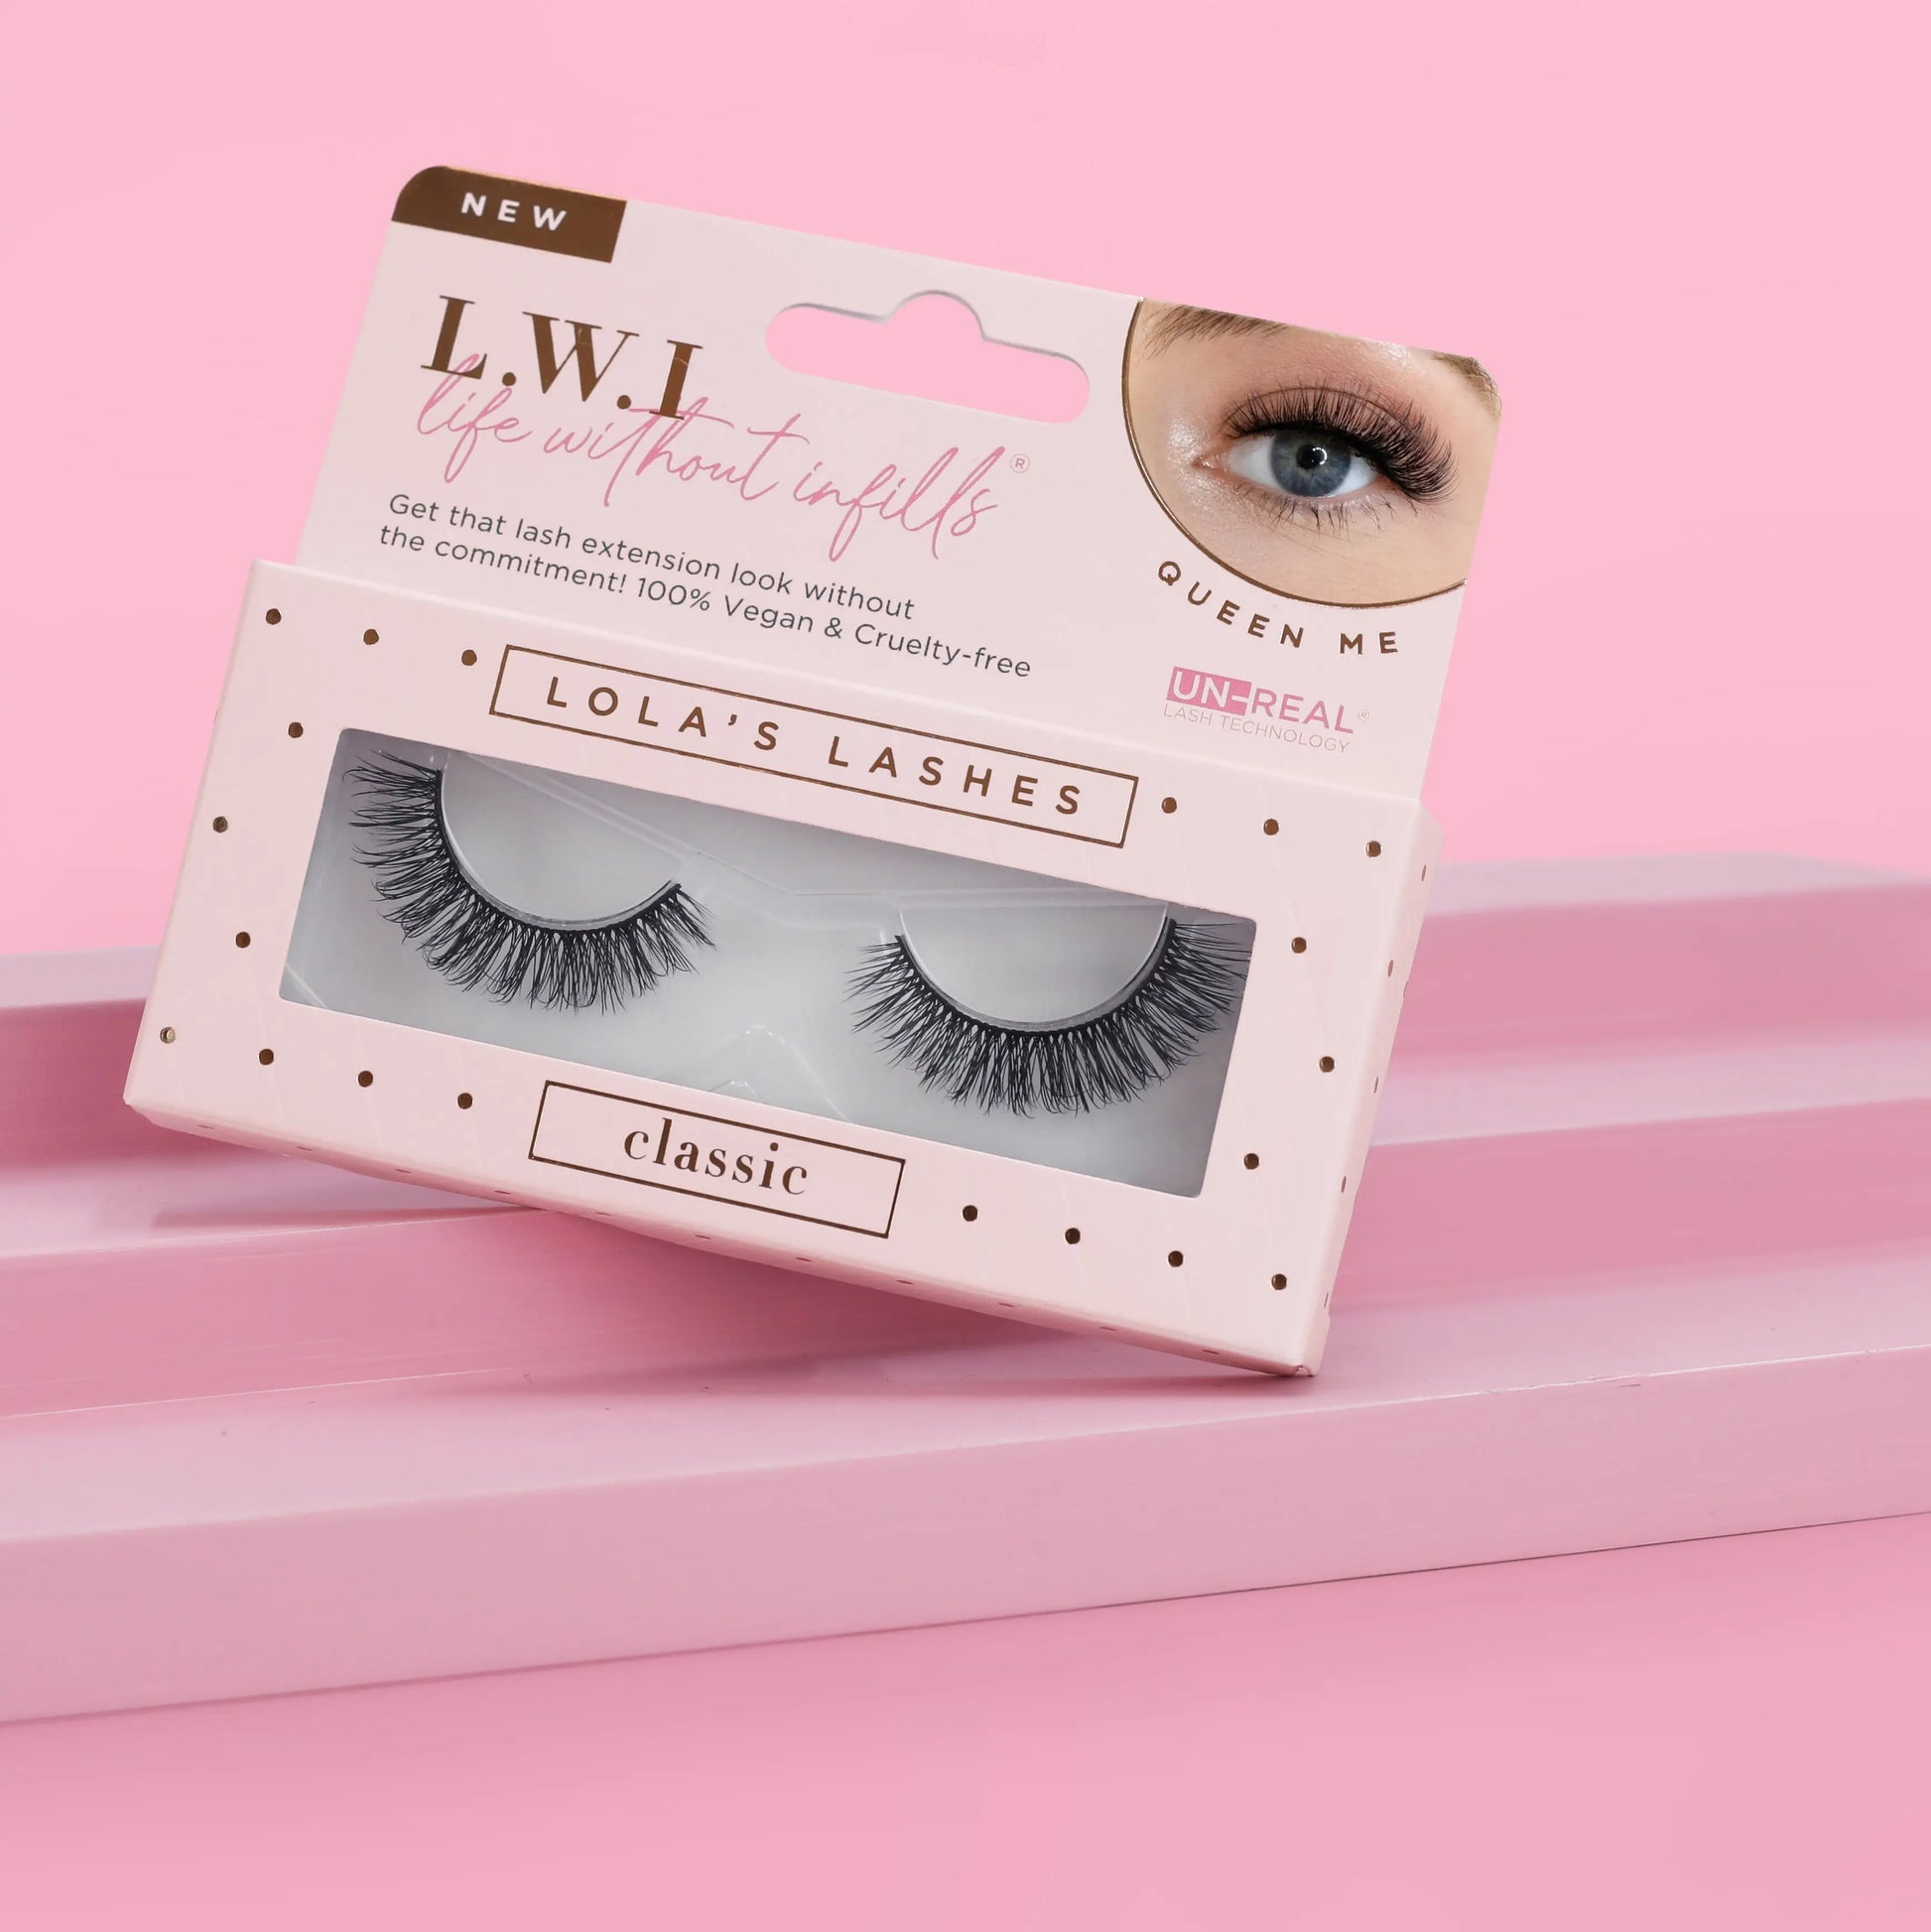 L.W.I Queen Me Russian Strip Lashes - Spellbound